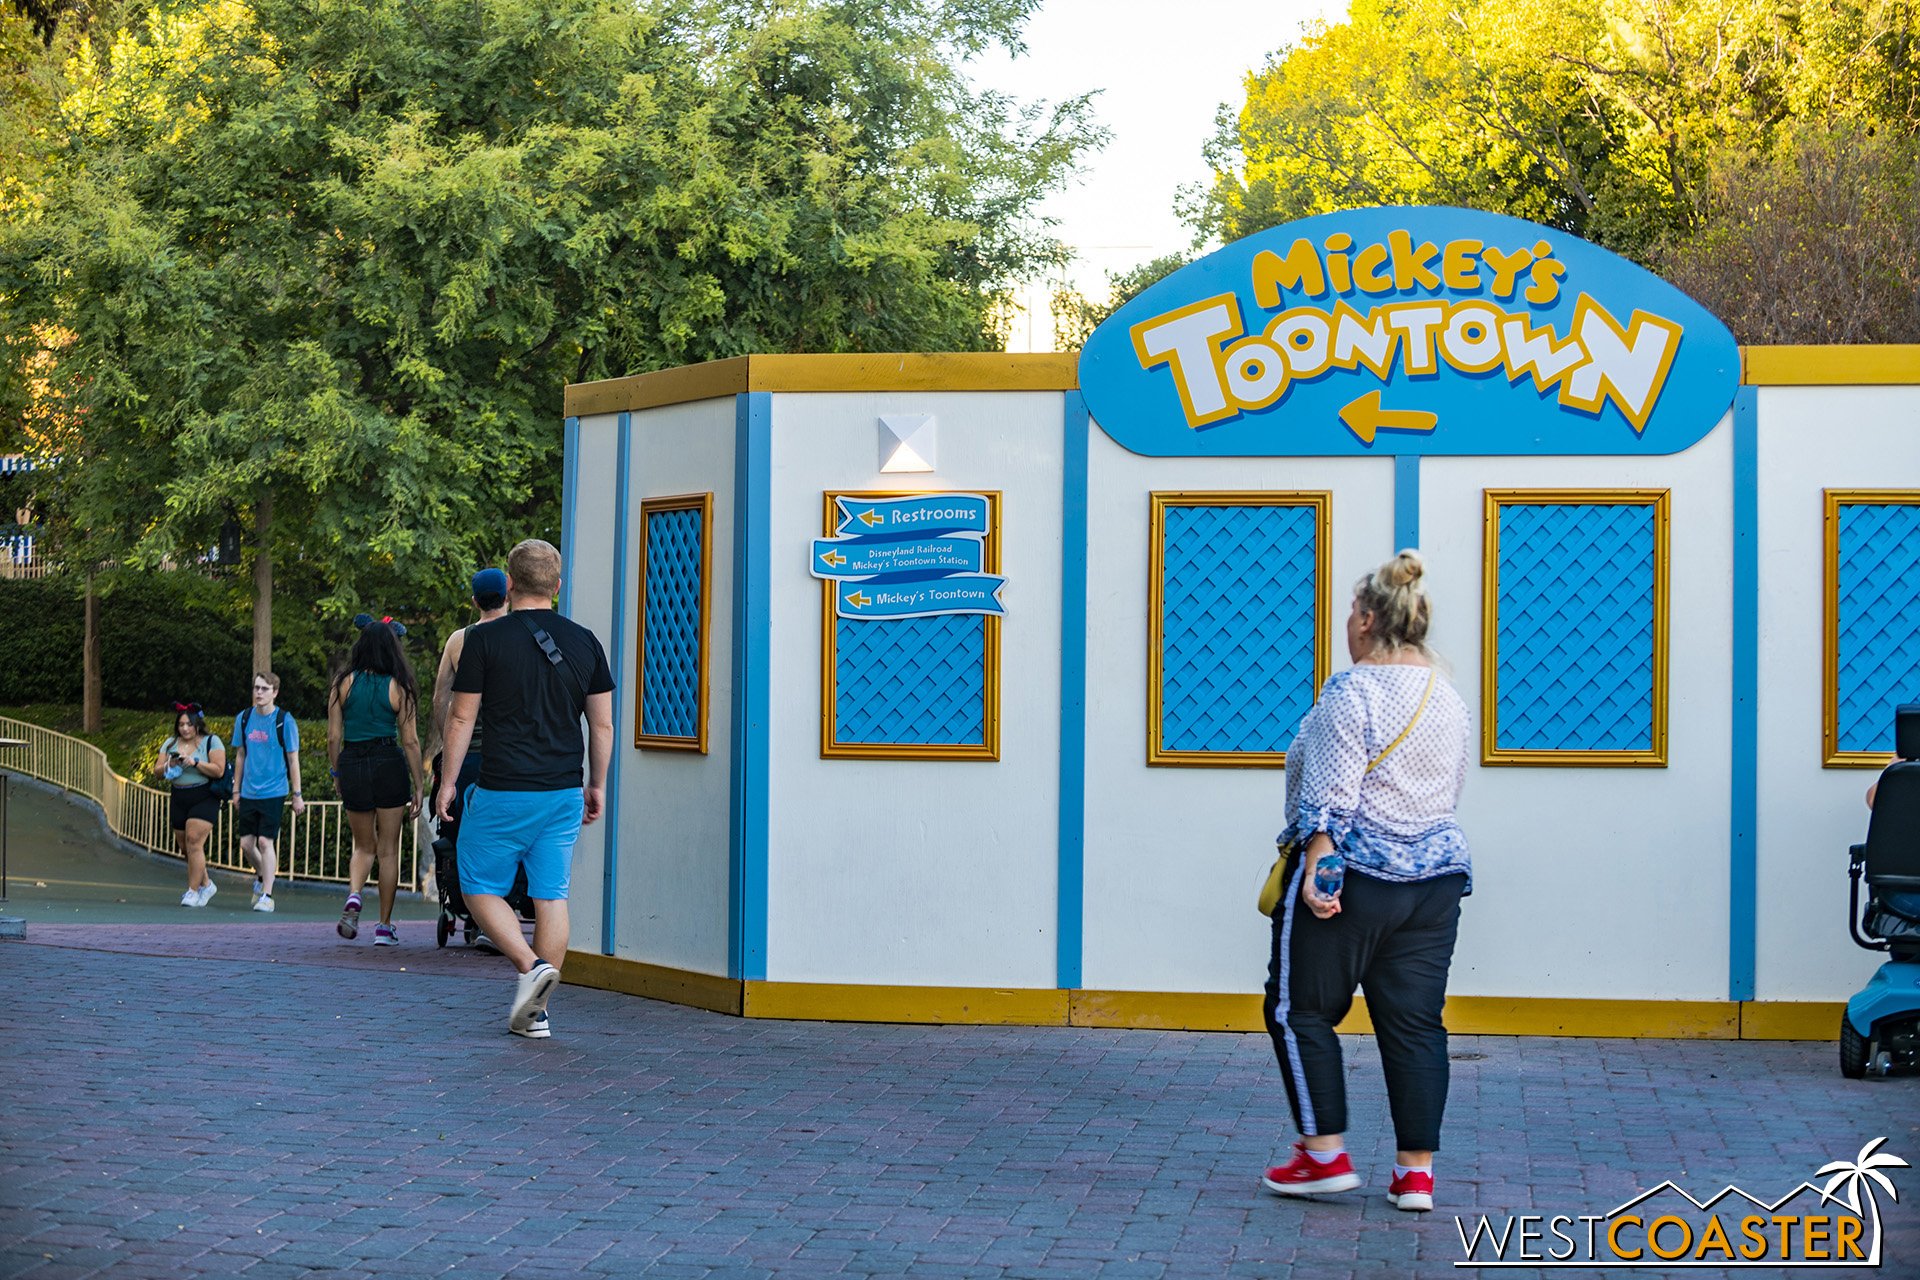  The path to Mickey’s Toontown was temporarily narrower last fall and winter. 